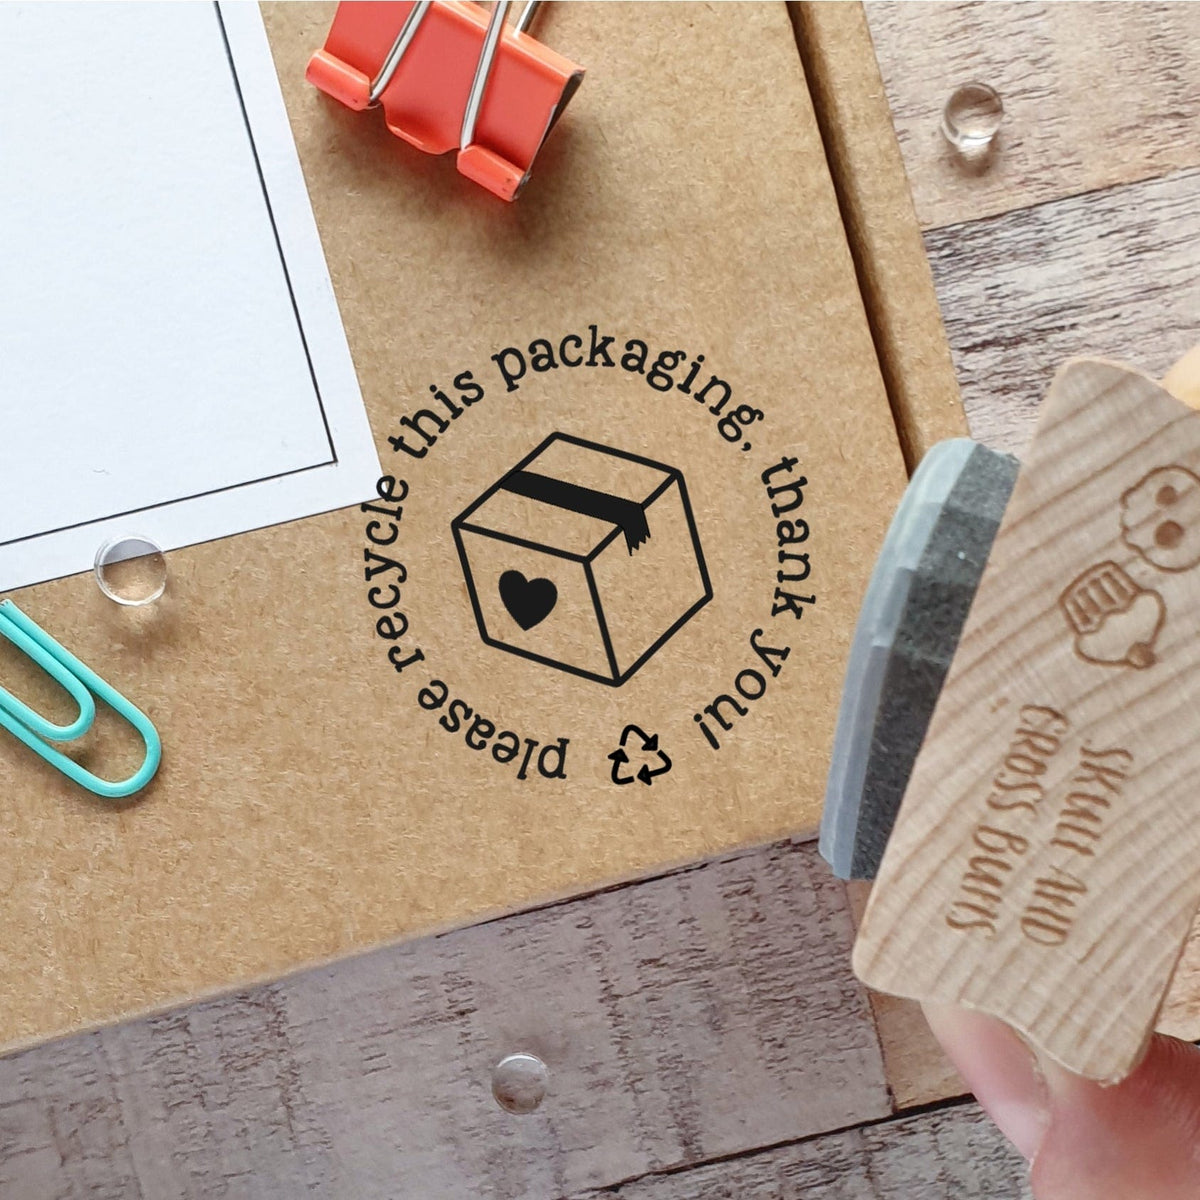 Skull and Cross Buns 'Please Recycle Packaging' Rubber Stamp